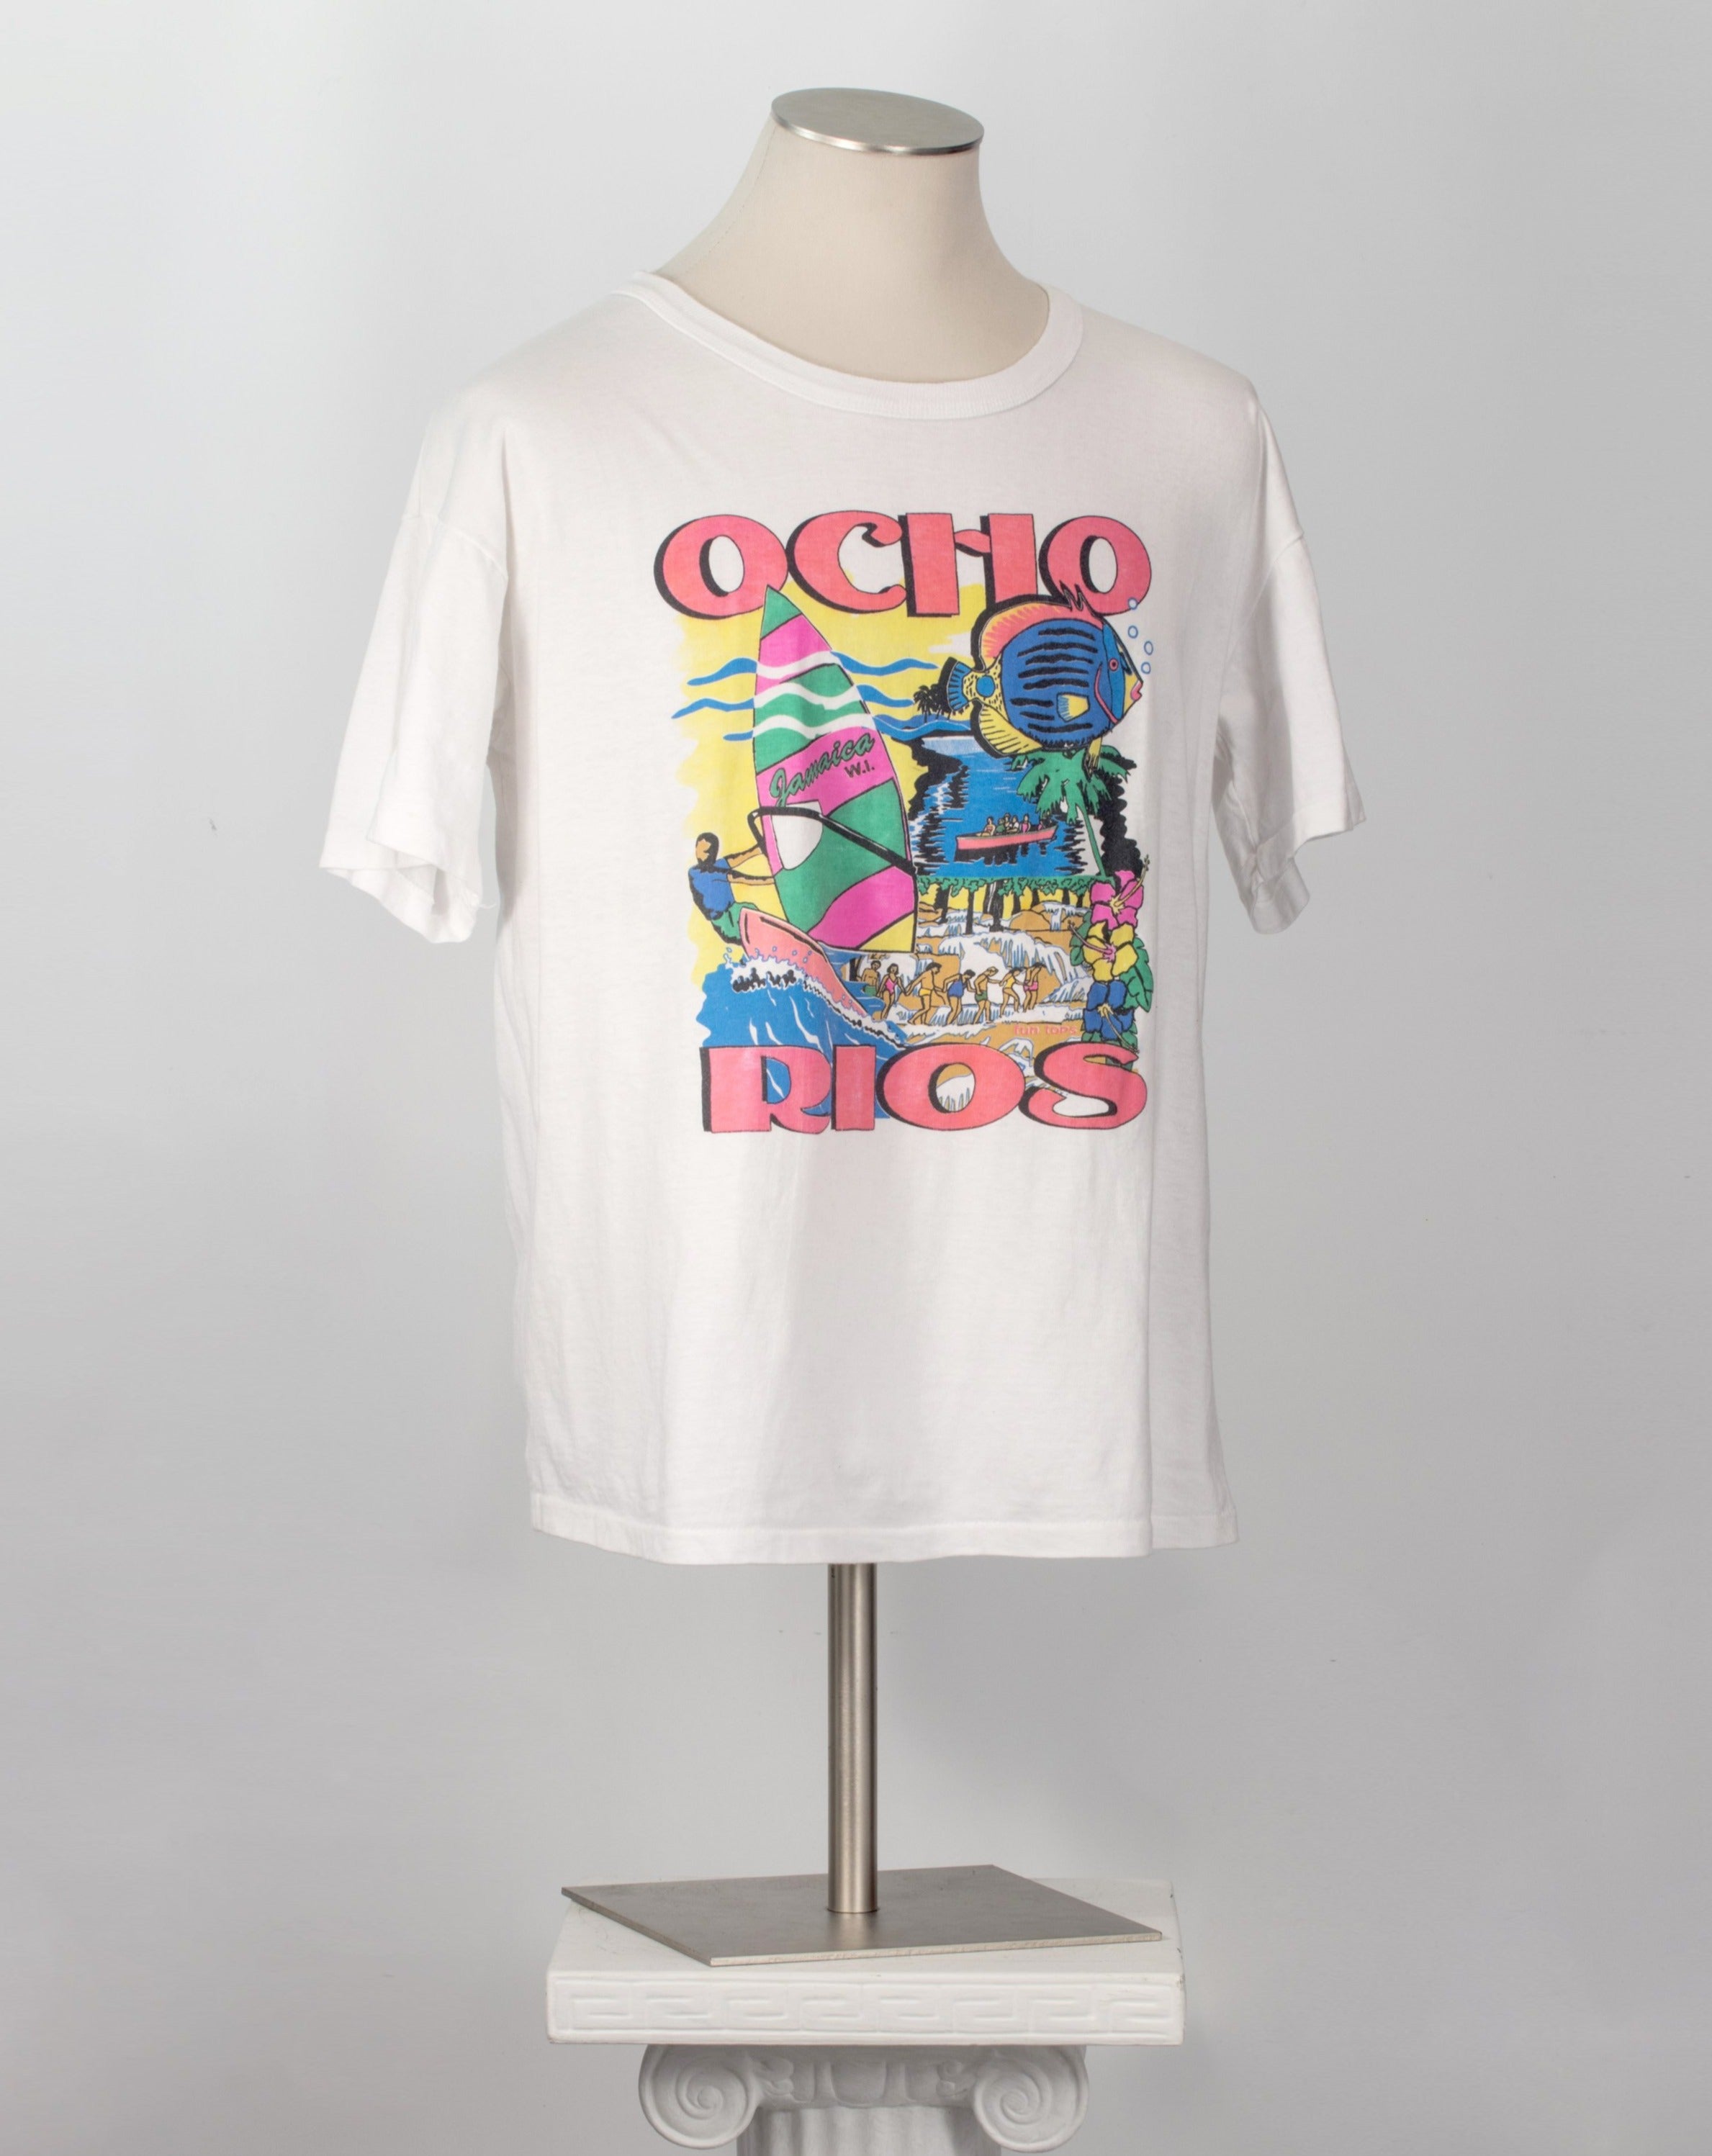 Ocho Rios t-shirt - Made in Jamaica – New Wave Pool